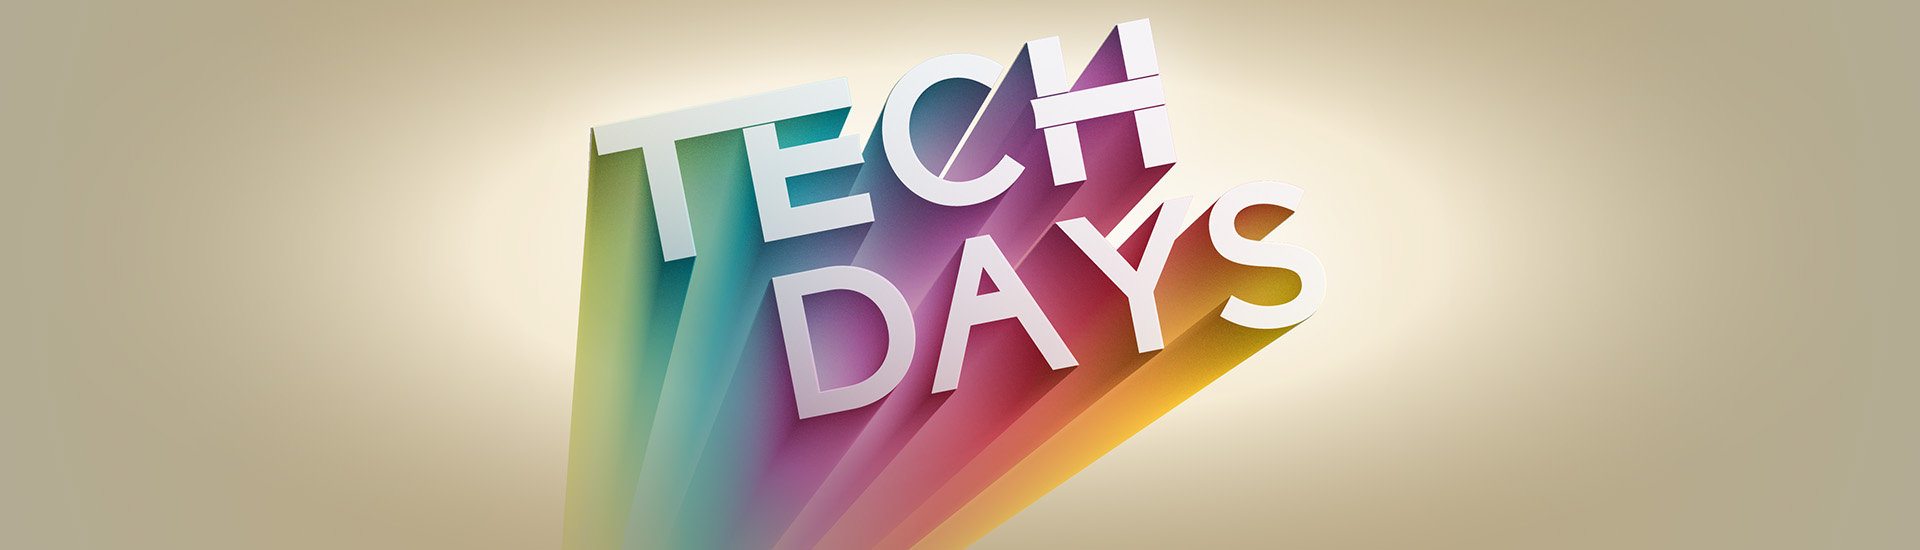 tech days 2021 graphic